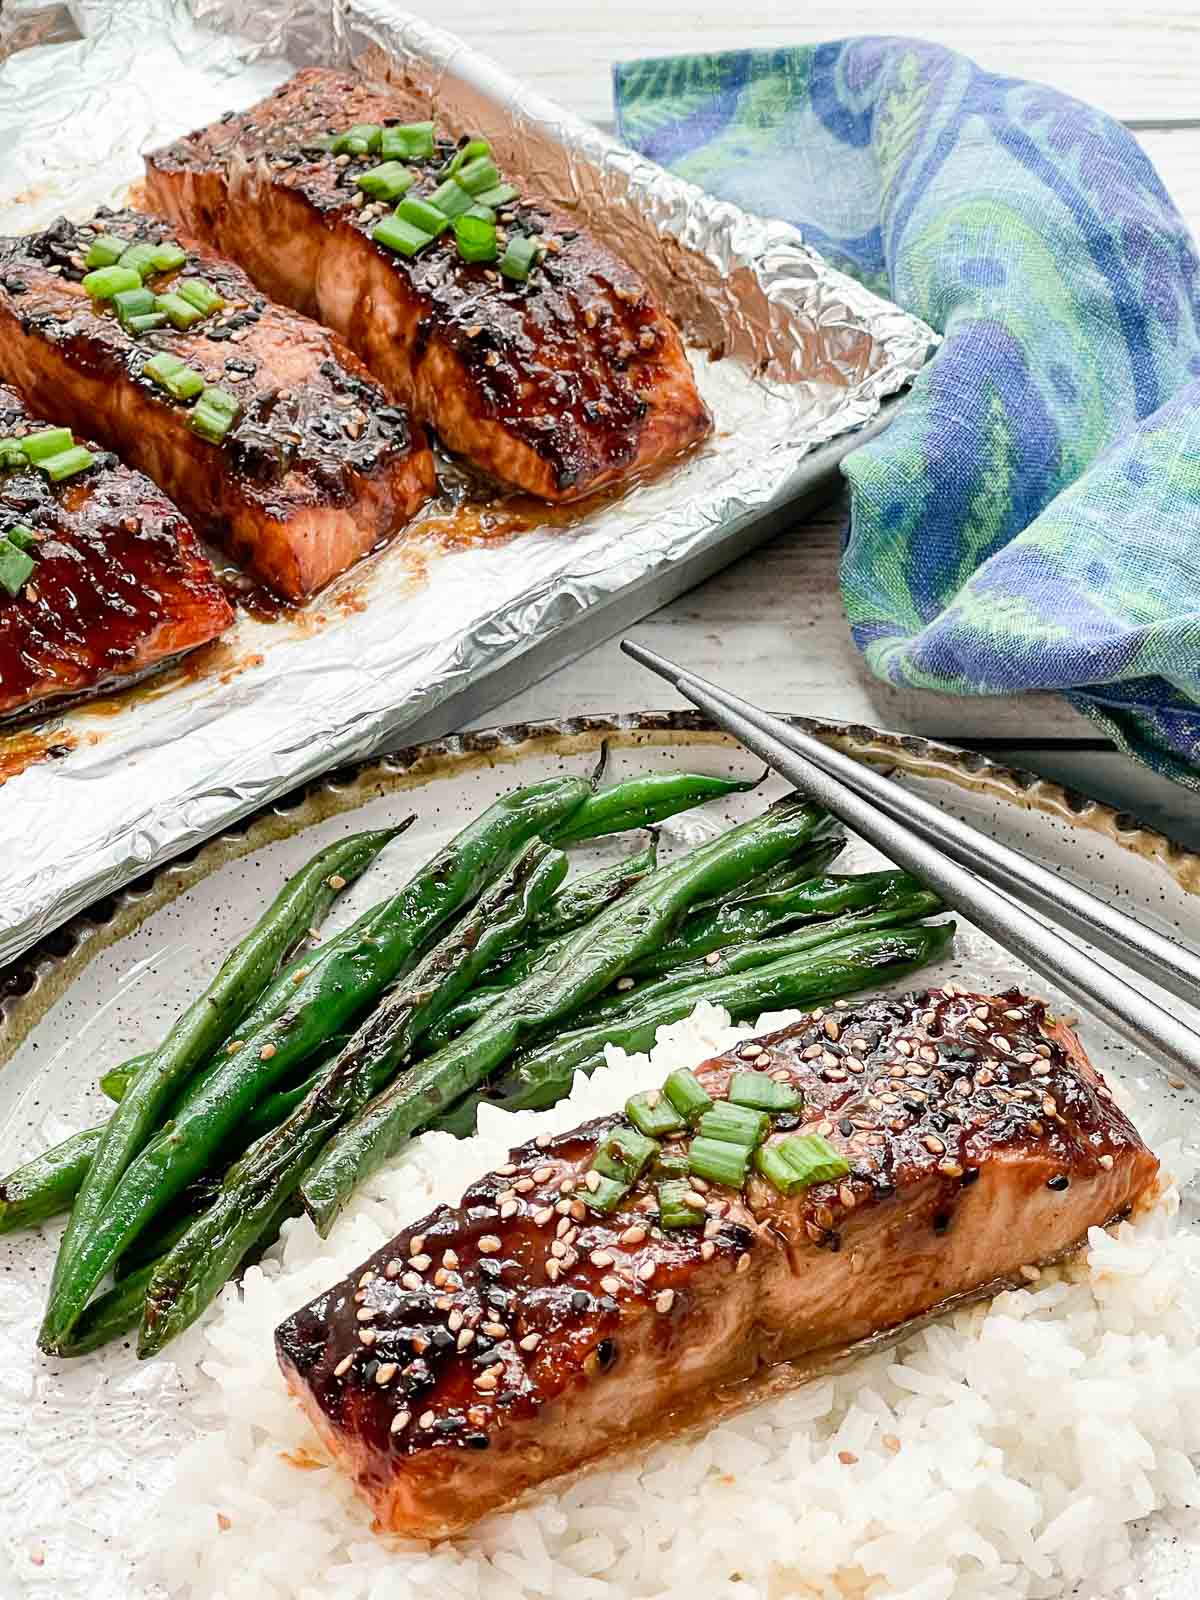 A filet of broiled miso glazed salmon on top of white rice on a plate with silver chopsticks and blistered green beans and a baking tray with broiled miso glazed salmon filets and a blue napkin on the side.